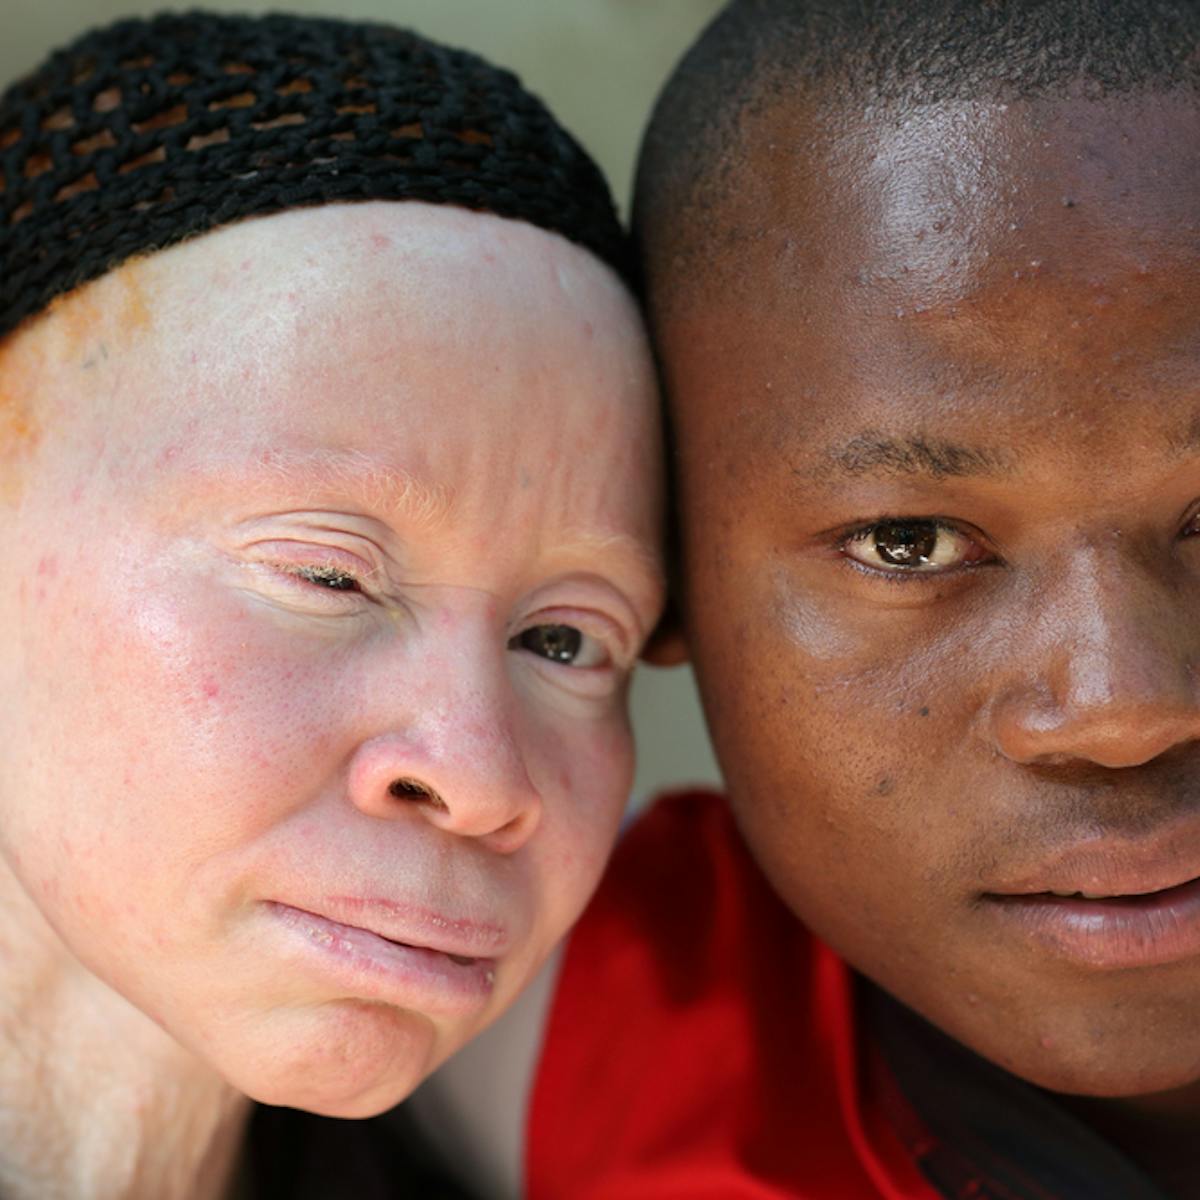 Being black in a white skin: students with albinism battle prejudice